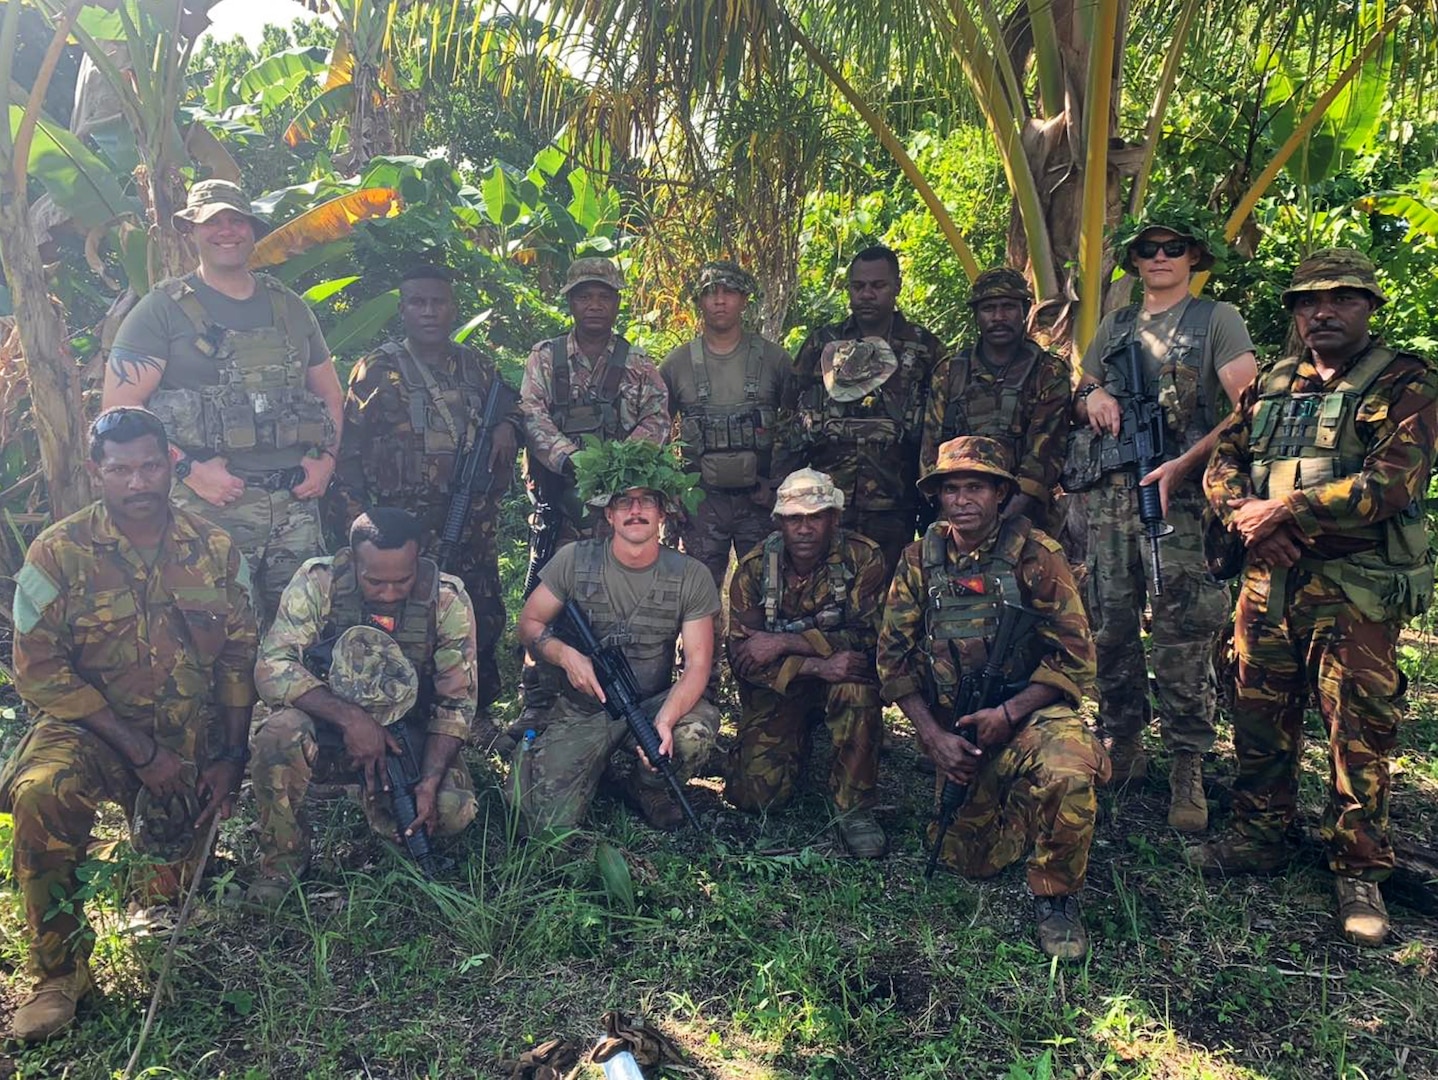 Soldiers with the Wisconsin Army National Guard’s 1st Squadron, 105th Cavalry Regiment, trained with soldiers of the 1st and 2nd Royal Pacific Infantry Regiments, Papua New Guinea Defence Force, during Tamiok Strike 2023 at Taruma Barracks, Port Moresby, Papua New Guinea beginning July 31. Tamiok Strike 23 is sponsored by U.S. Army Pacific, and hosted by the PNGDF with U.S. forces under the command of the 130th Engineer Brigade, 8th Theater Support Command.